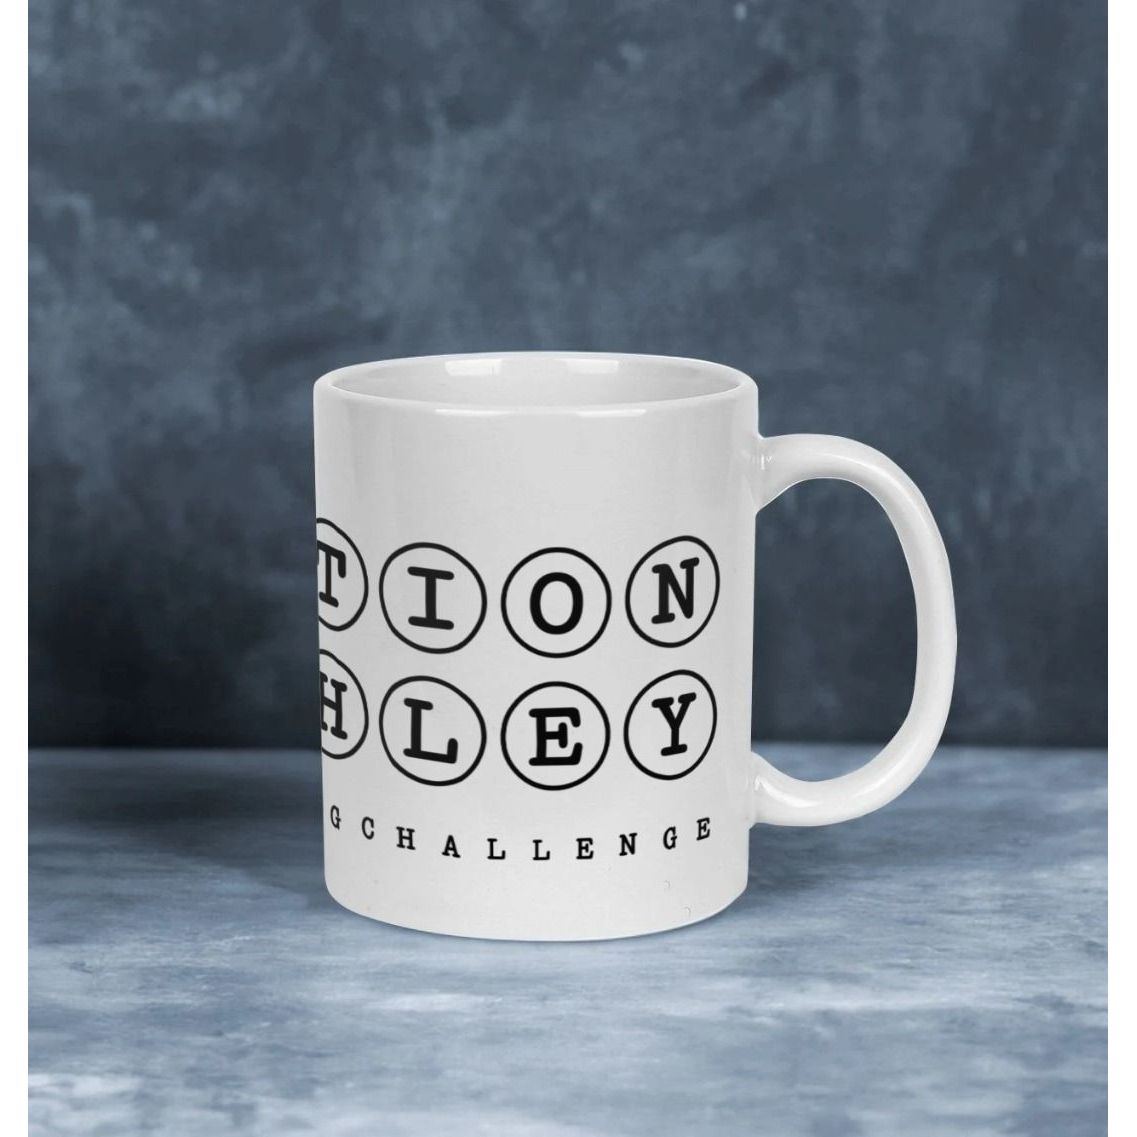 Operation Bletchley mug - ABF The Soldiers' Charity Shop